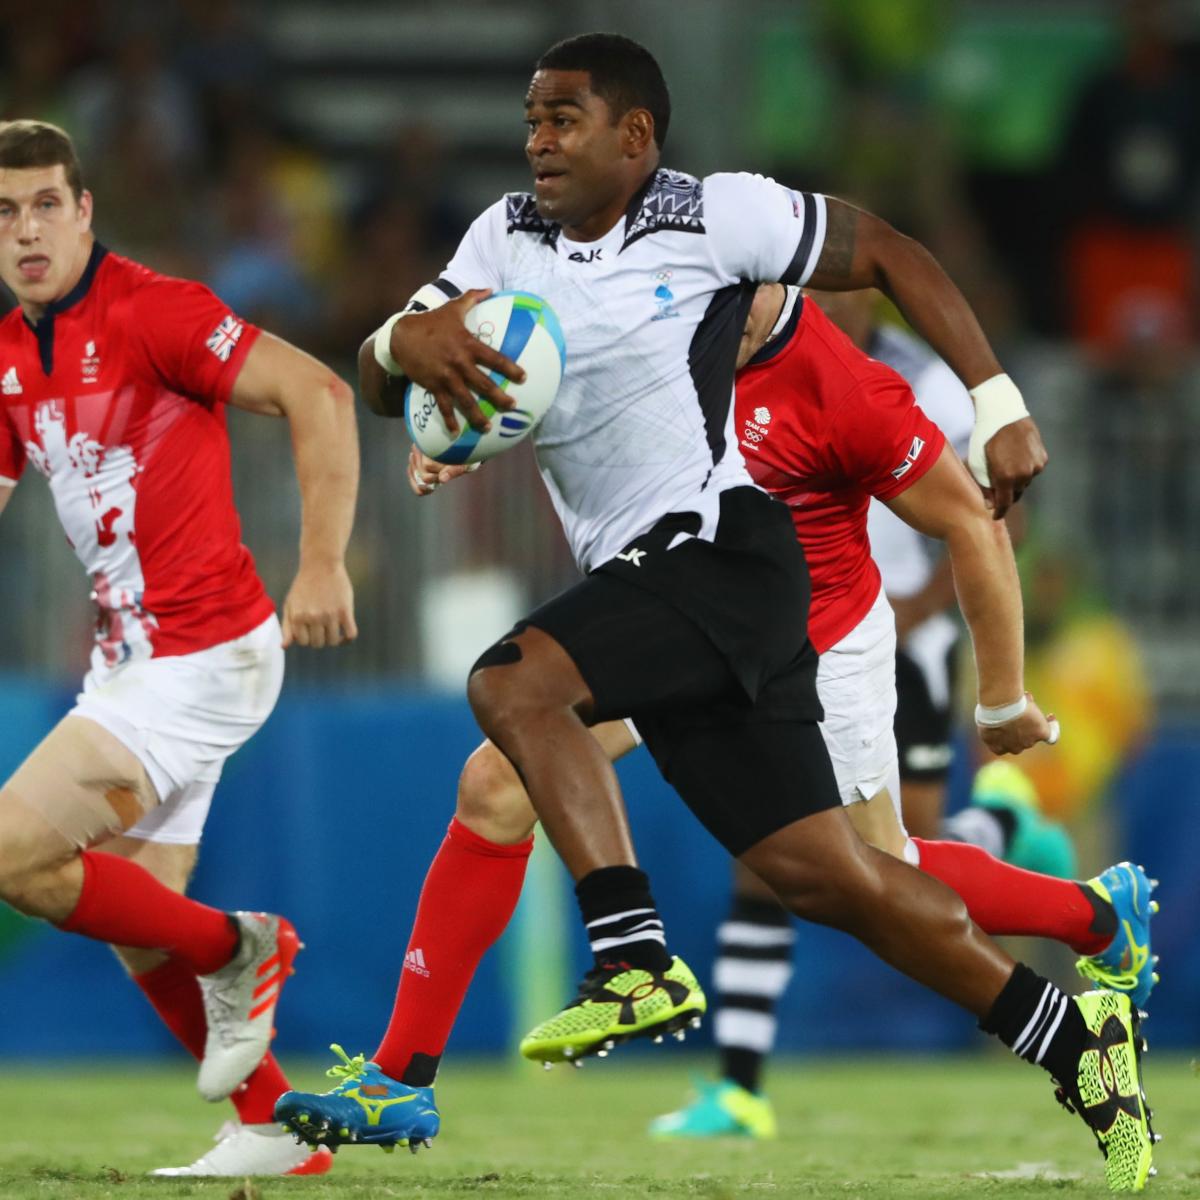 Olympic Rugby Sevens 2016: Medal Winners and Scores After Thursday's Results | Bleacher Report ...